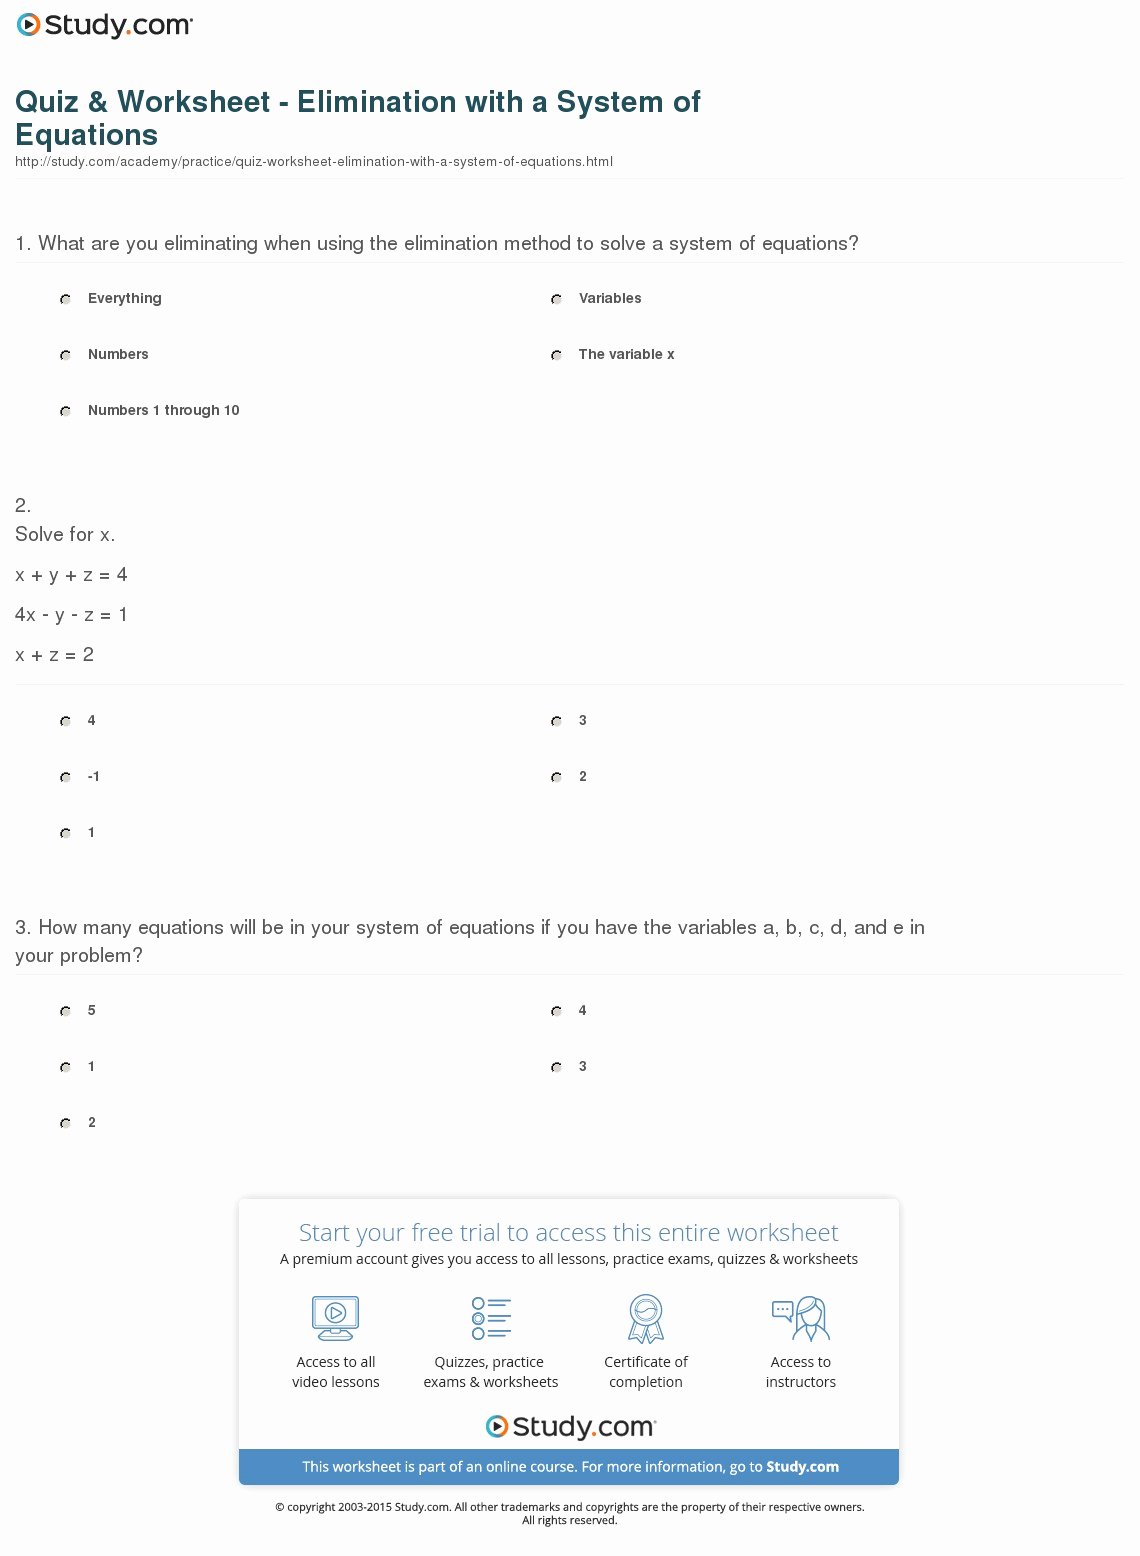 Systems Of Equations Elimination Worksheet Luxury Quiz &amp; Worksheet Elimination with A System Of Equations